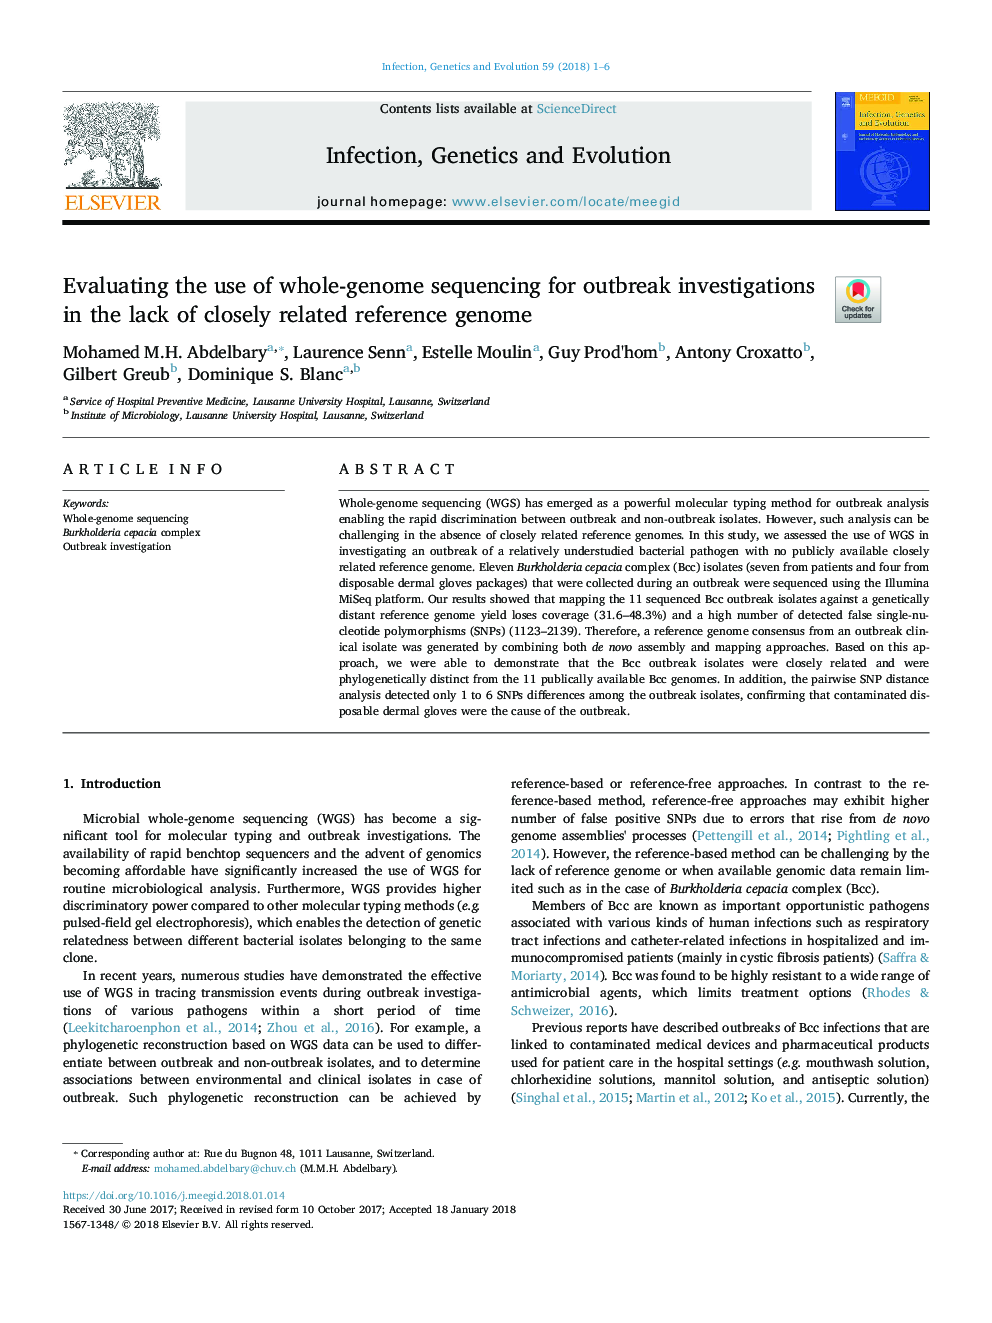 Evaluating the use of whole-genome sequencing for outbreak investigations in the lack of closely related reference genome